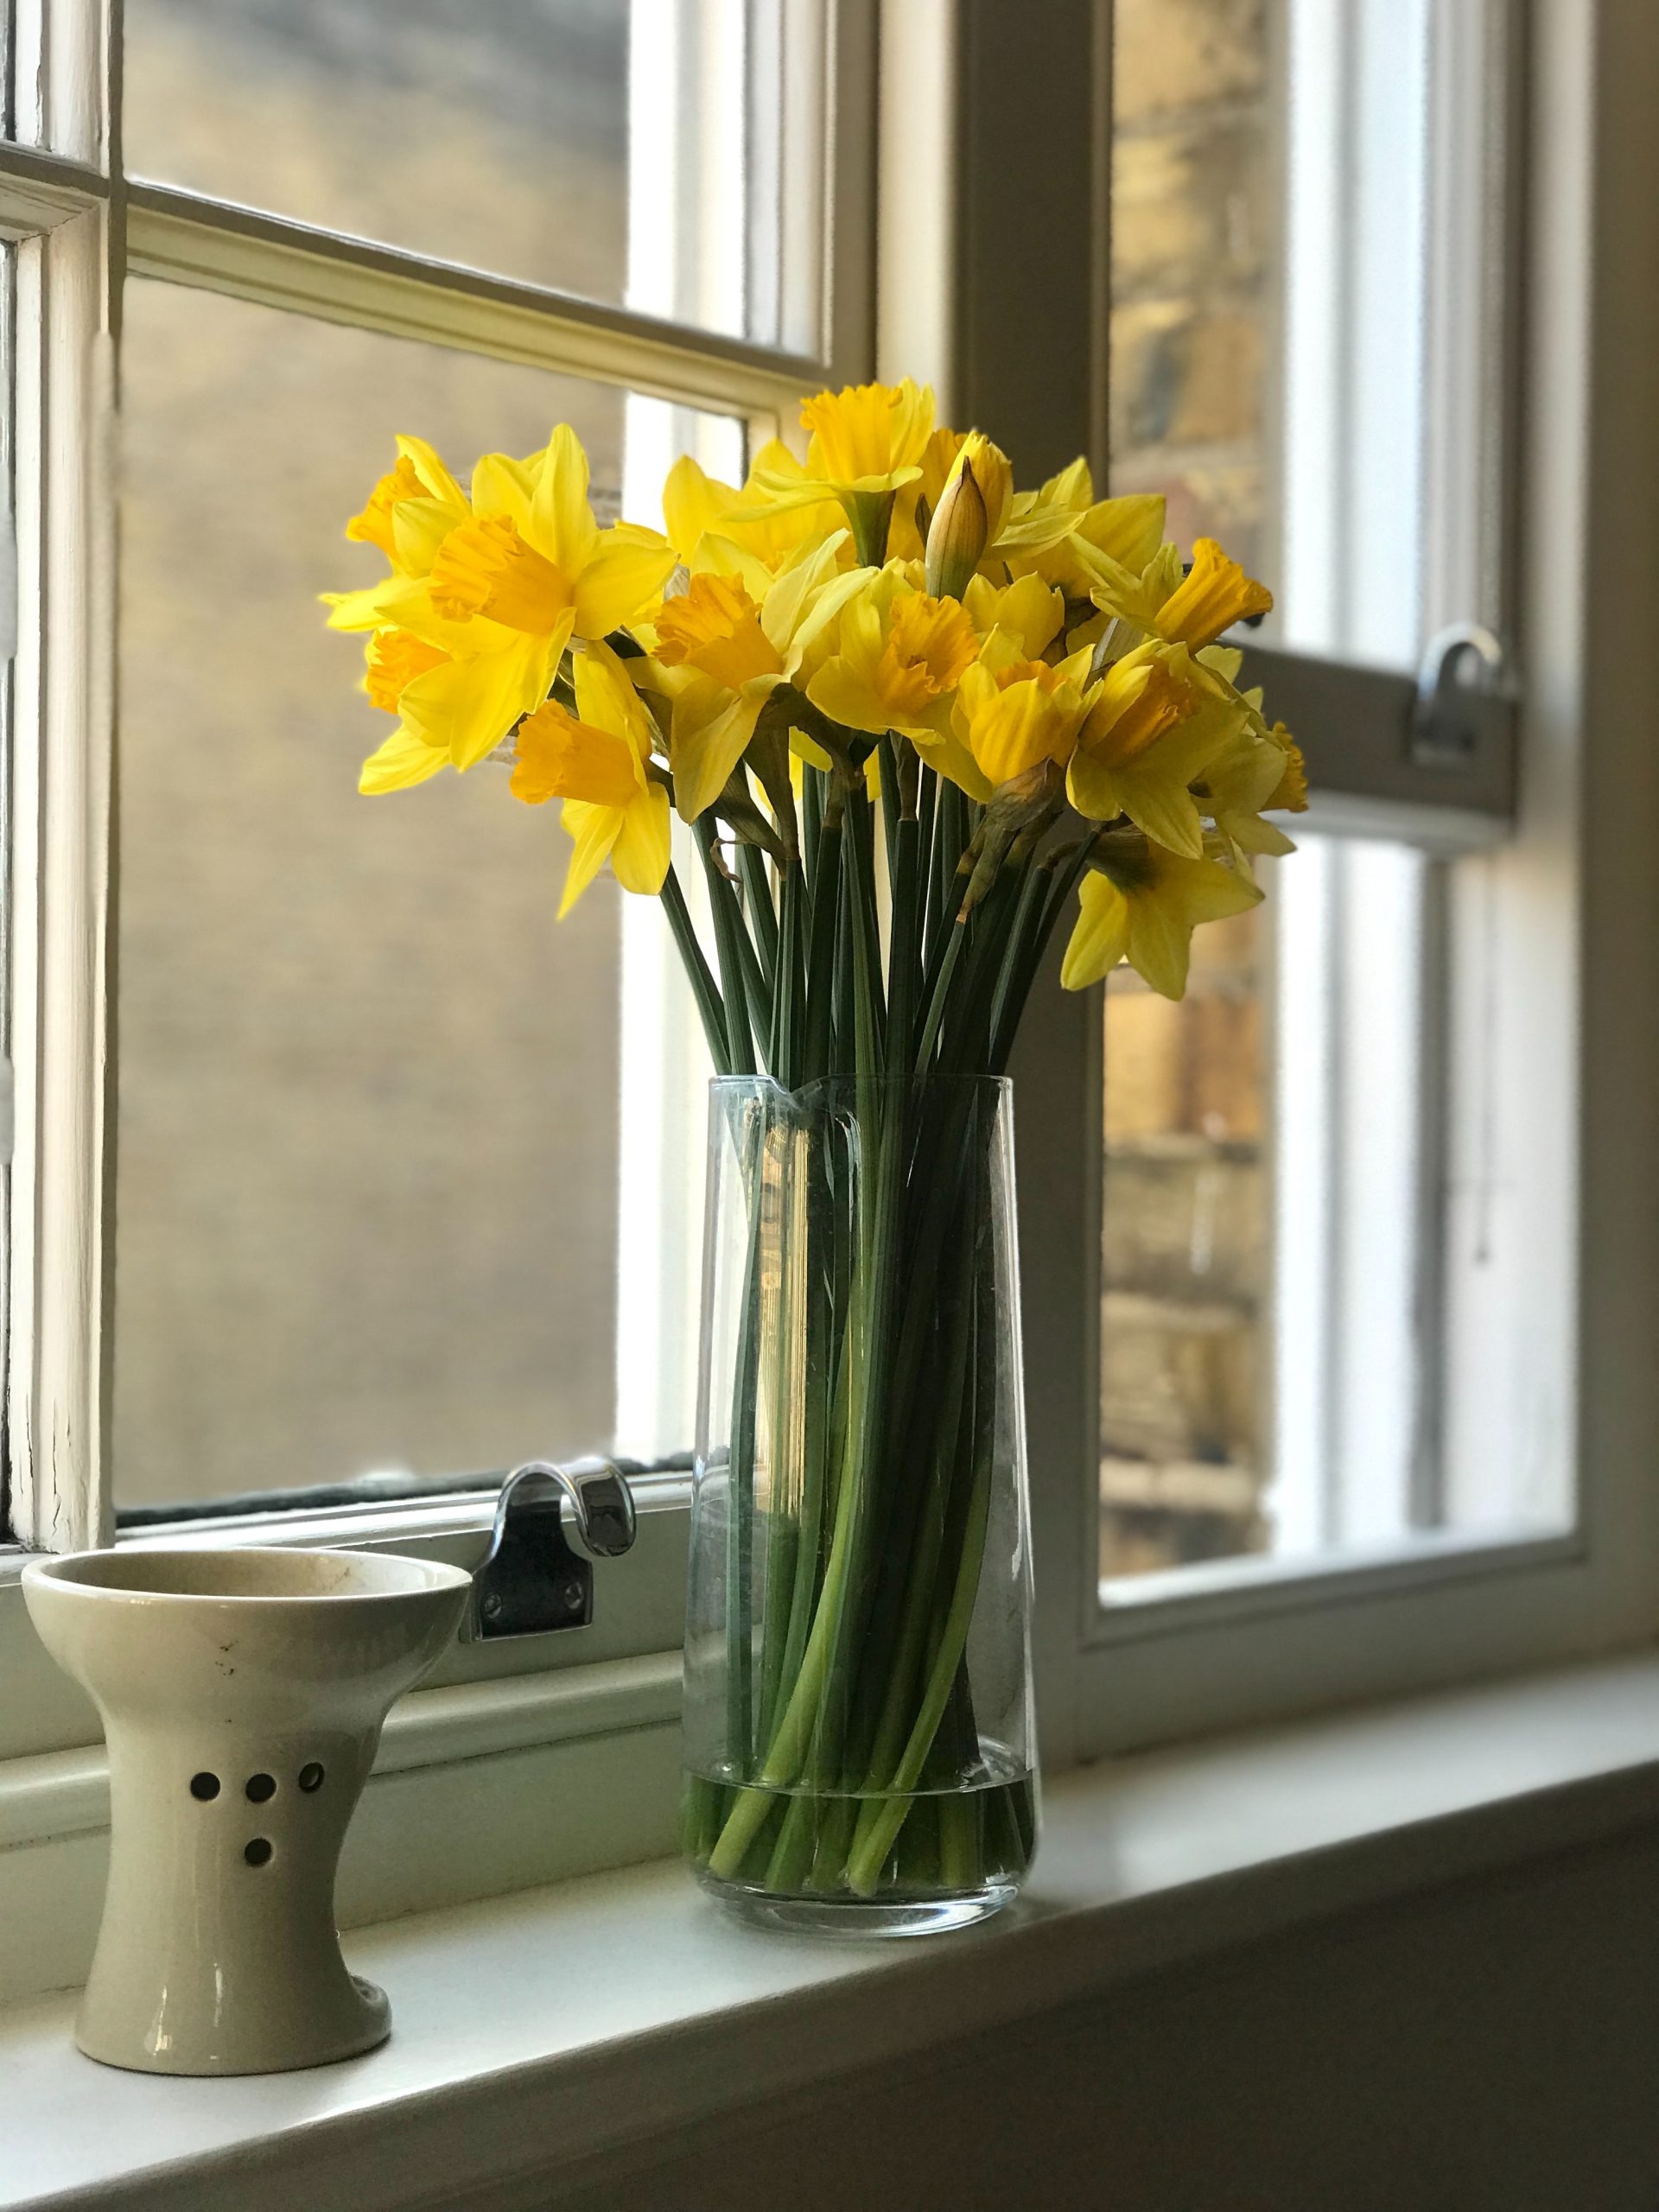 Are Daffodils Edible? Are They Safe To Eat?